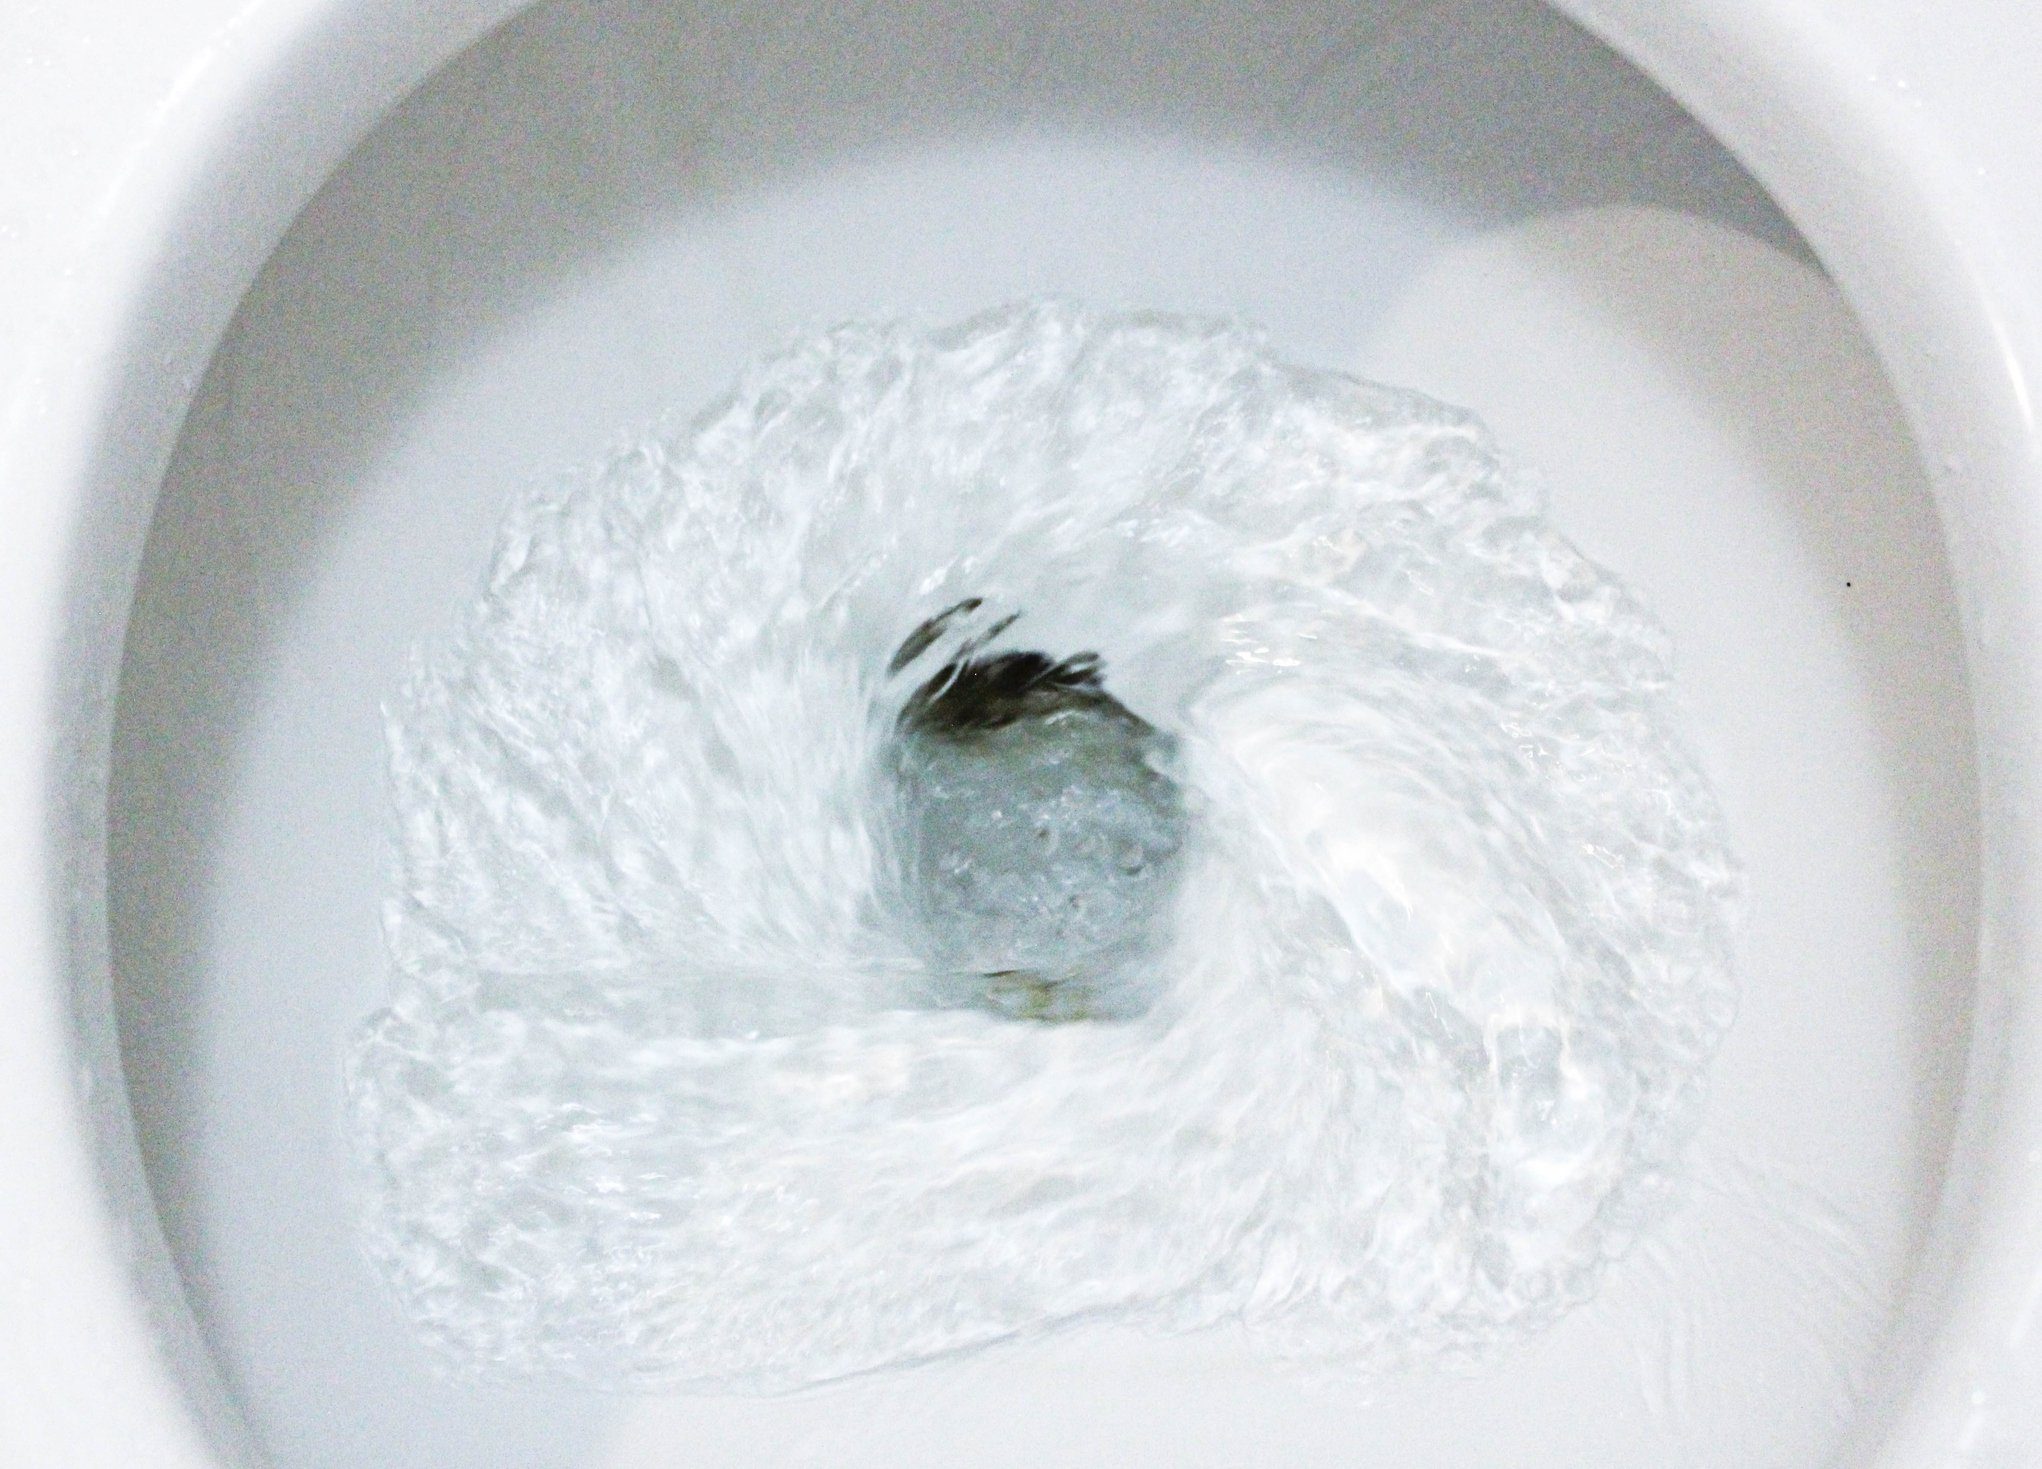 selective focus close up flushing toilet bowl for sanitary